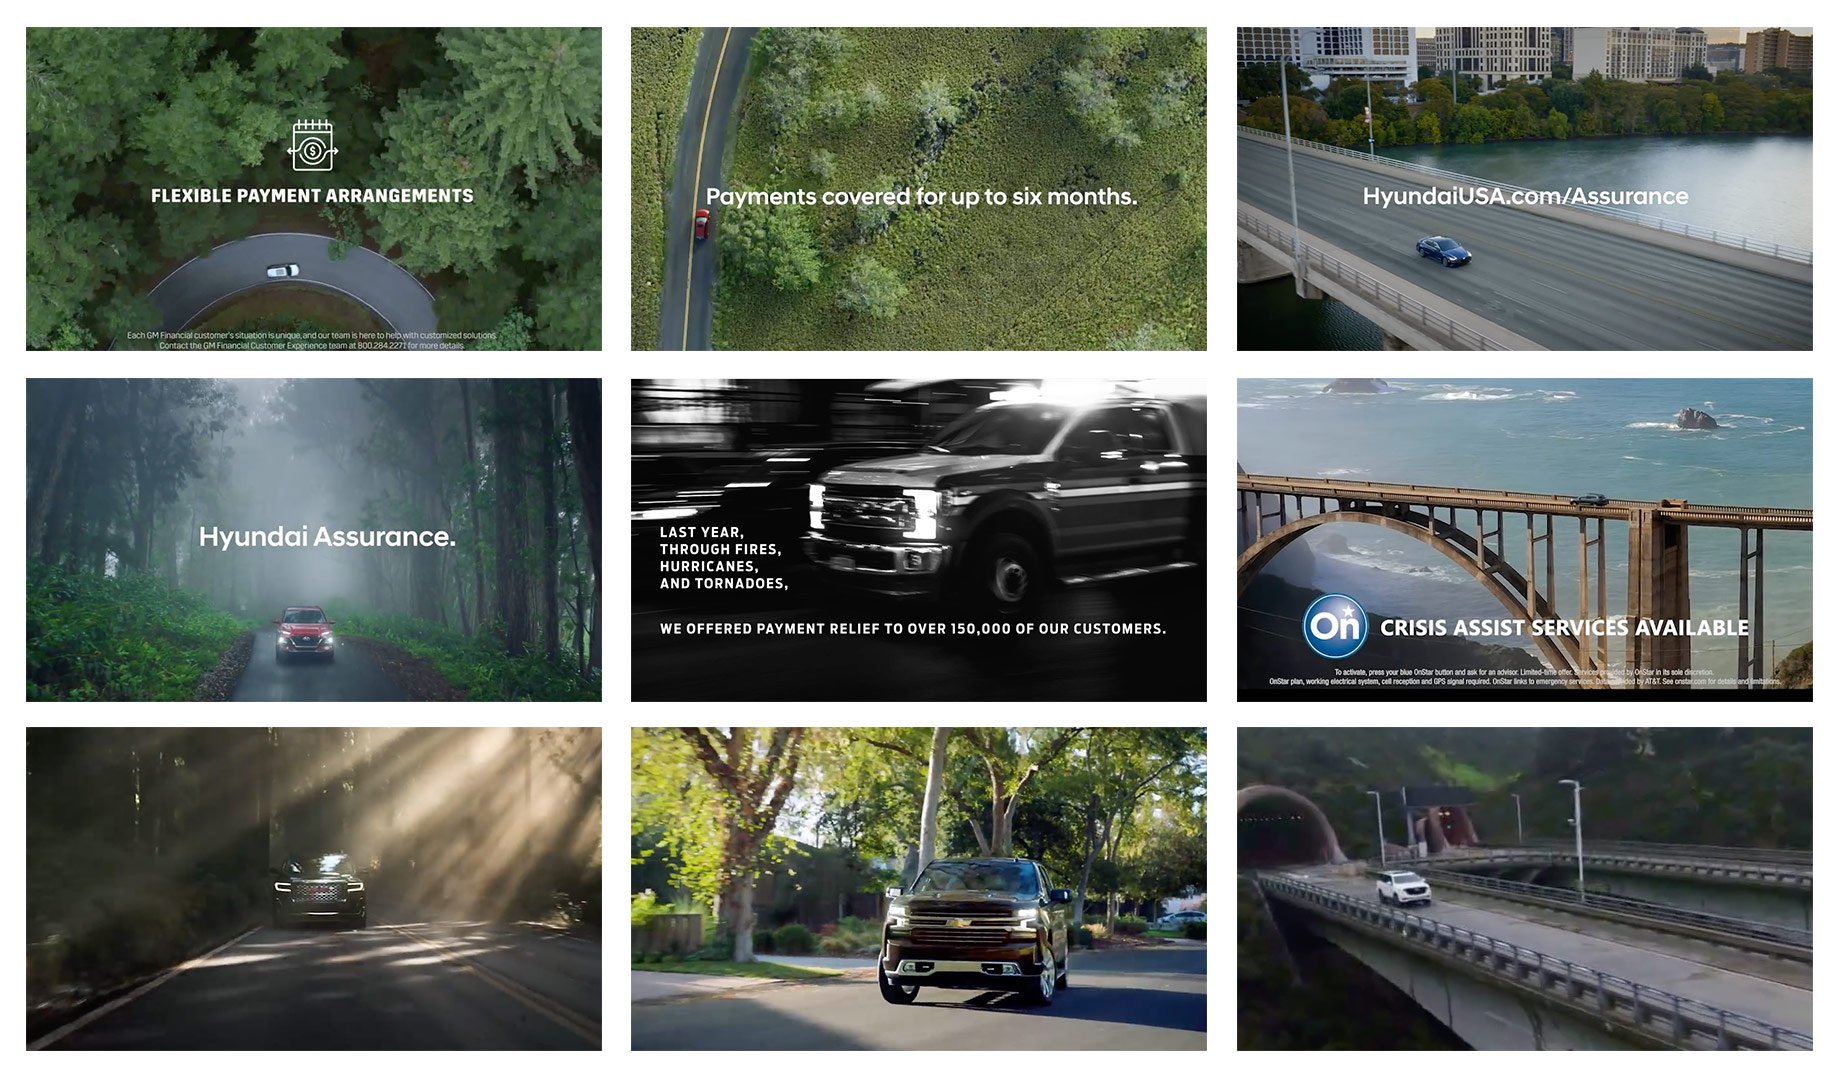 Ford stands out amongst similar auto ads